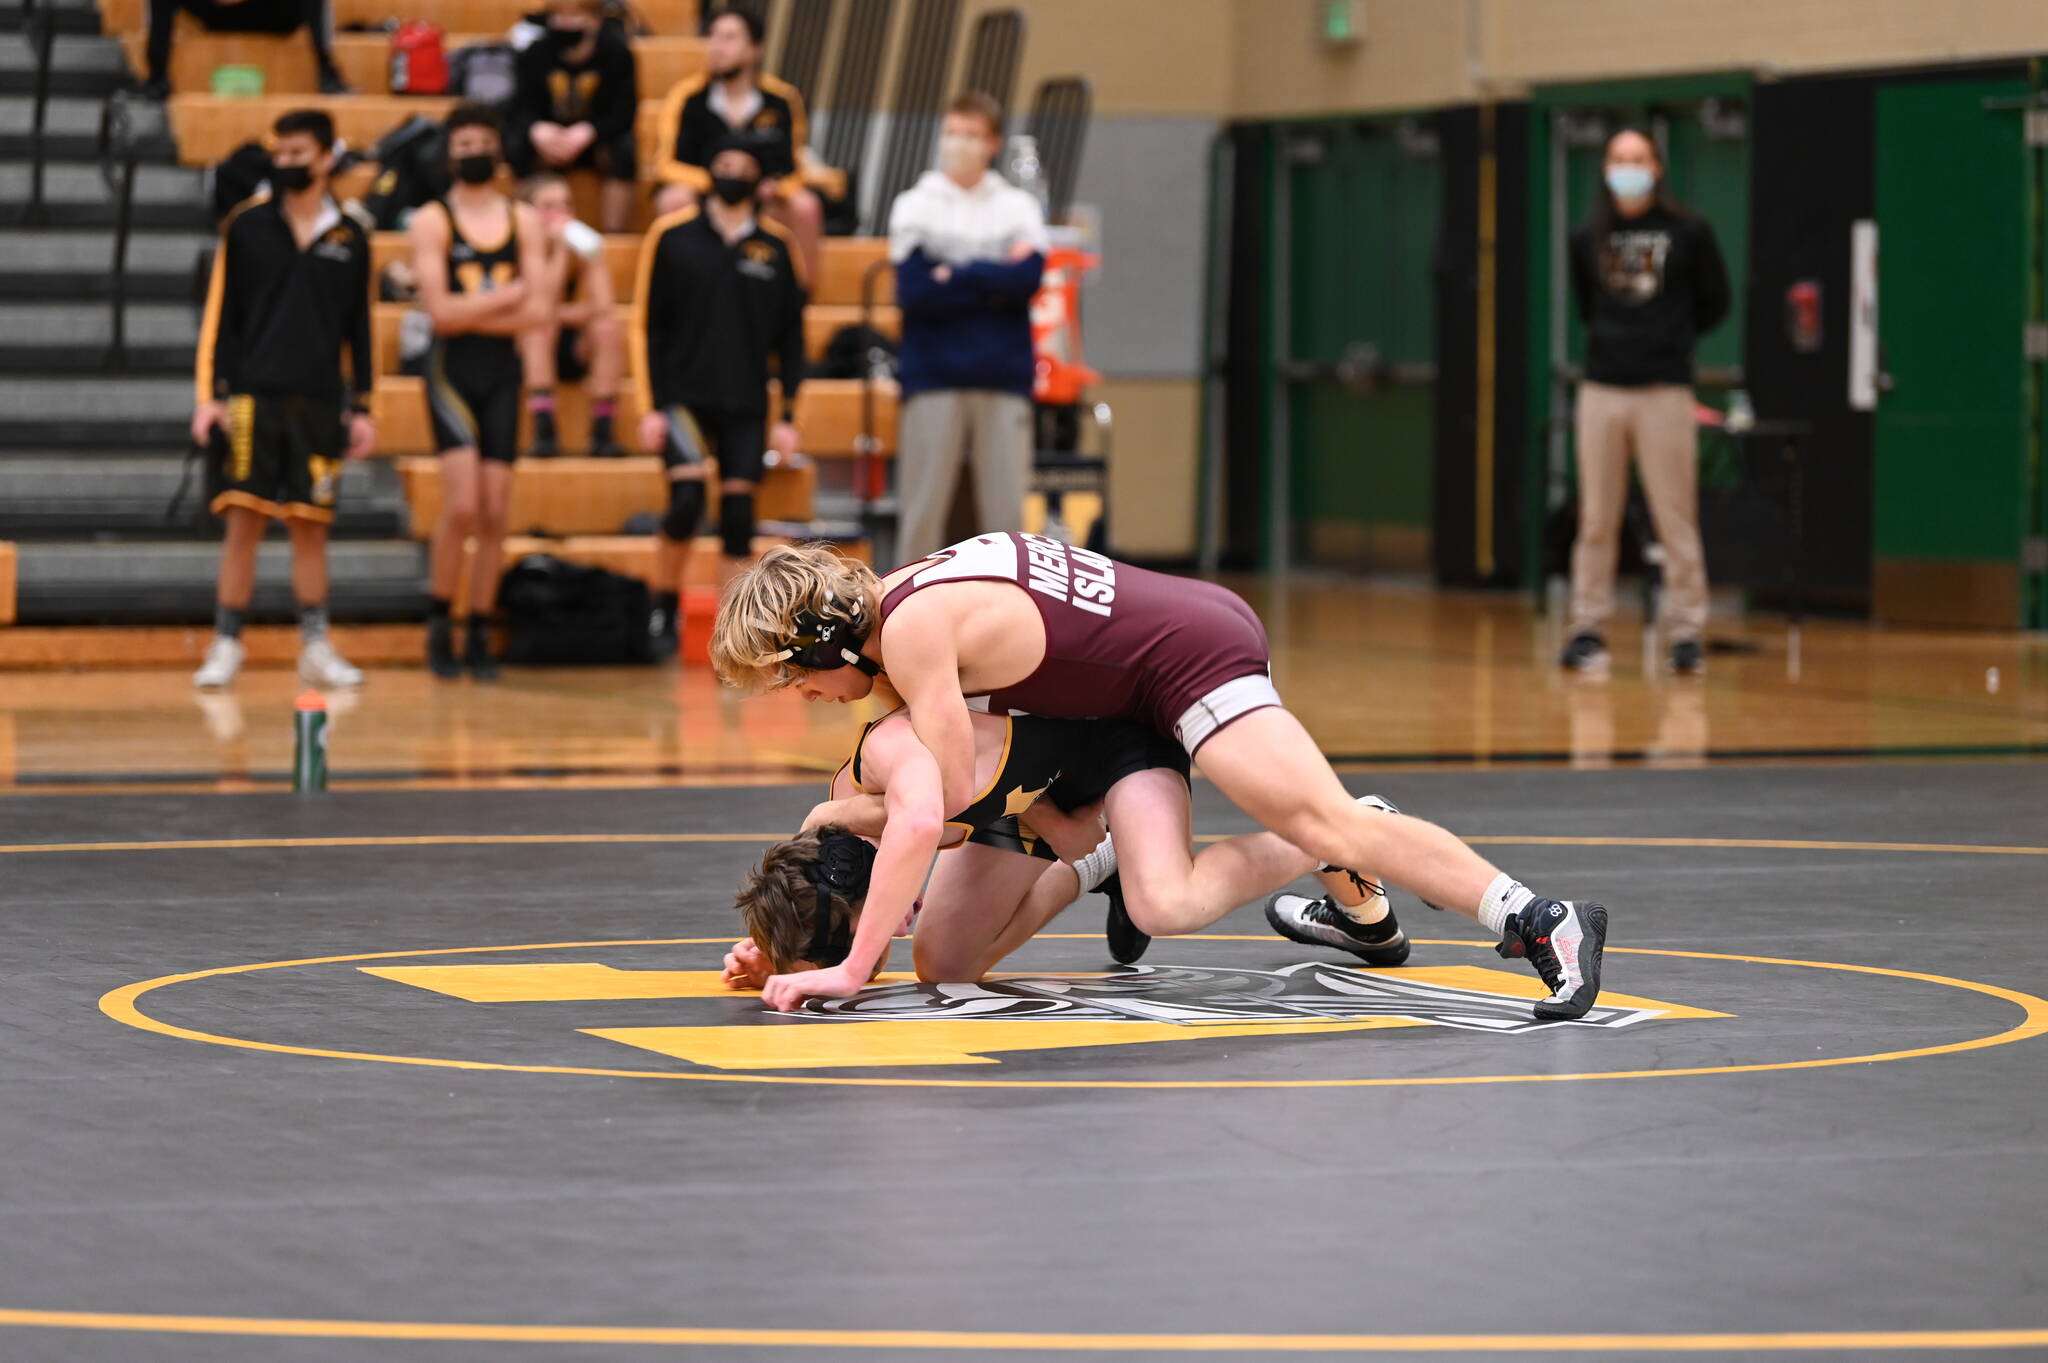 Mercer Island High School’s Lincoln Woods wrestles an Inglemoor High School opponent on Dec. 2. Woods won by a fall at 2:30. Courtesy photo